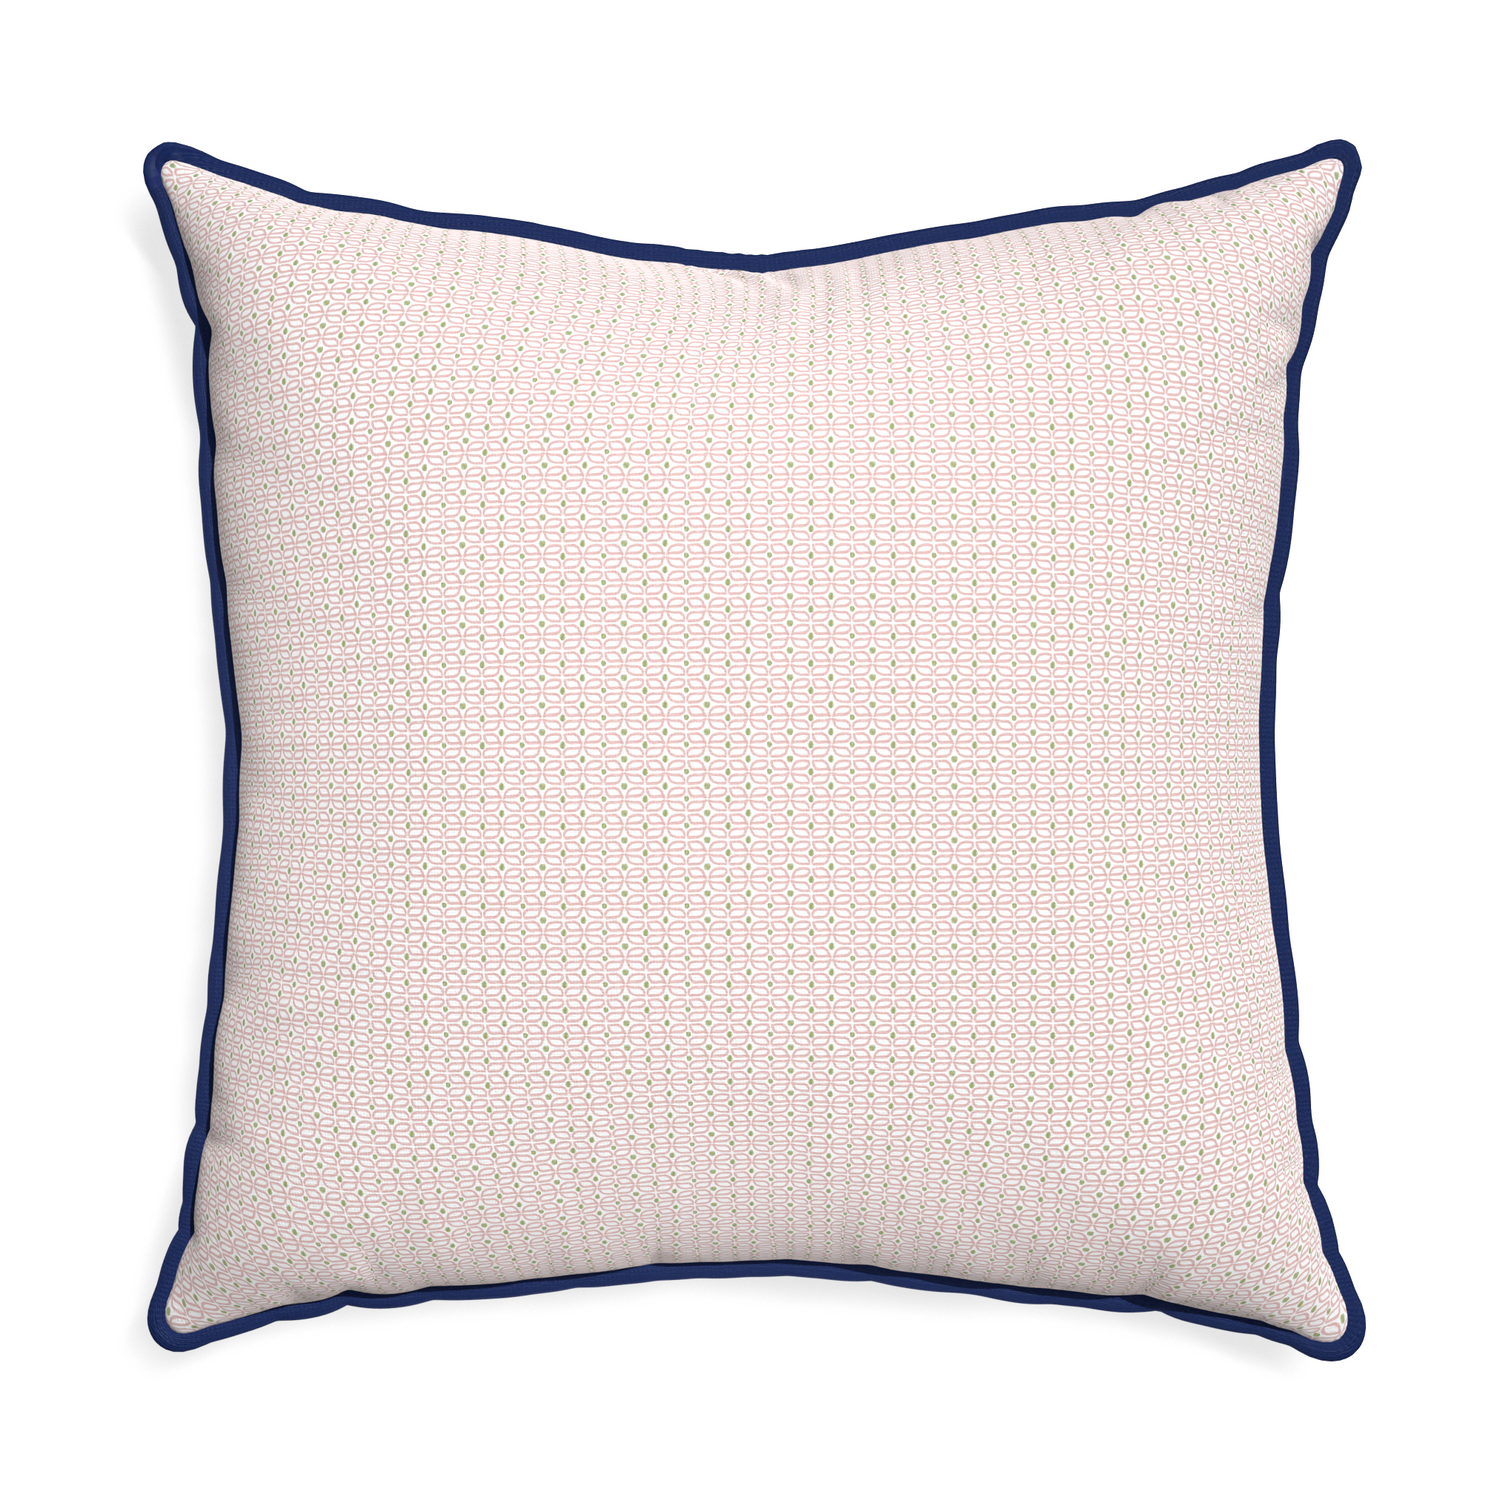 Euro-sham loomi pink custom pink geometricpillow with midnight piping on white background